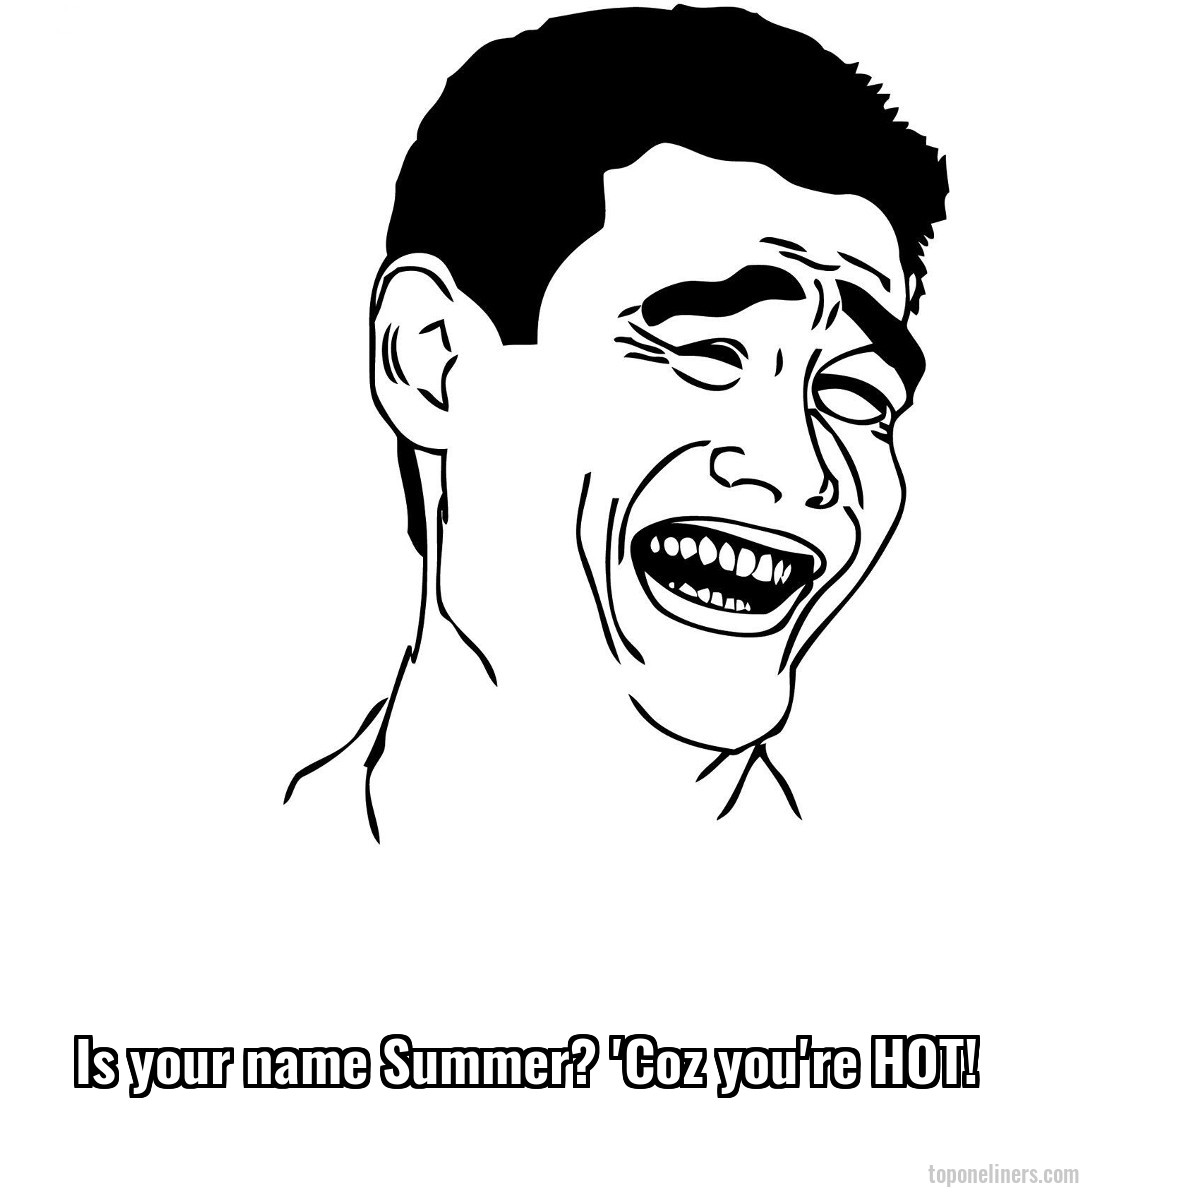 Is your name Summer? 'Coz you're HOT!
